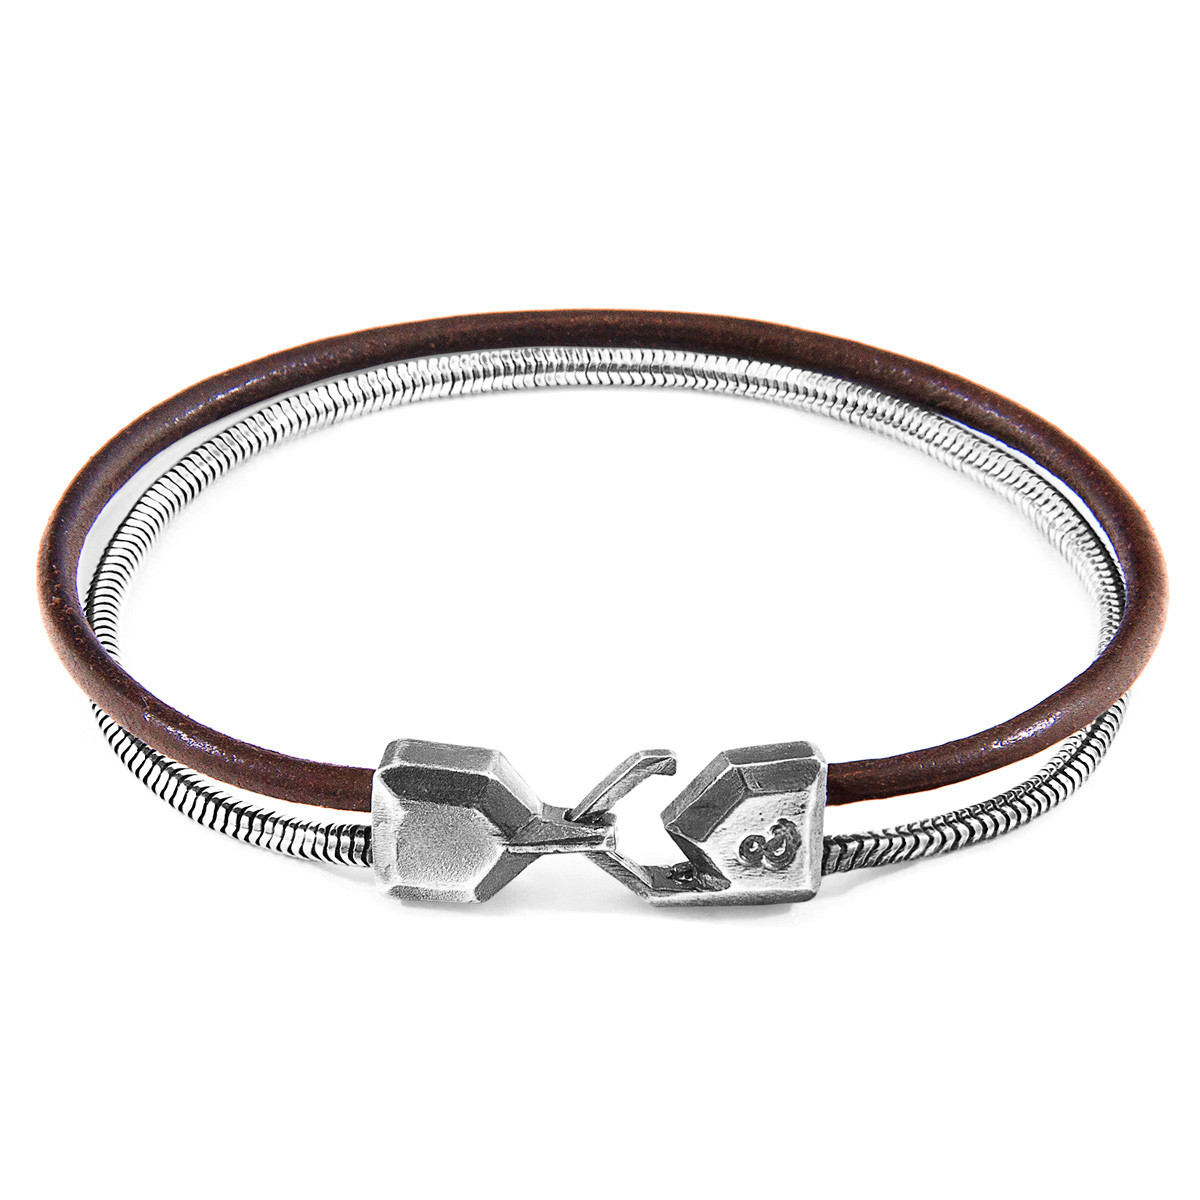 Mocha Brown Gallant Mast Silver and Round Leather Bracelet